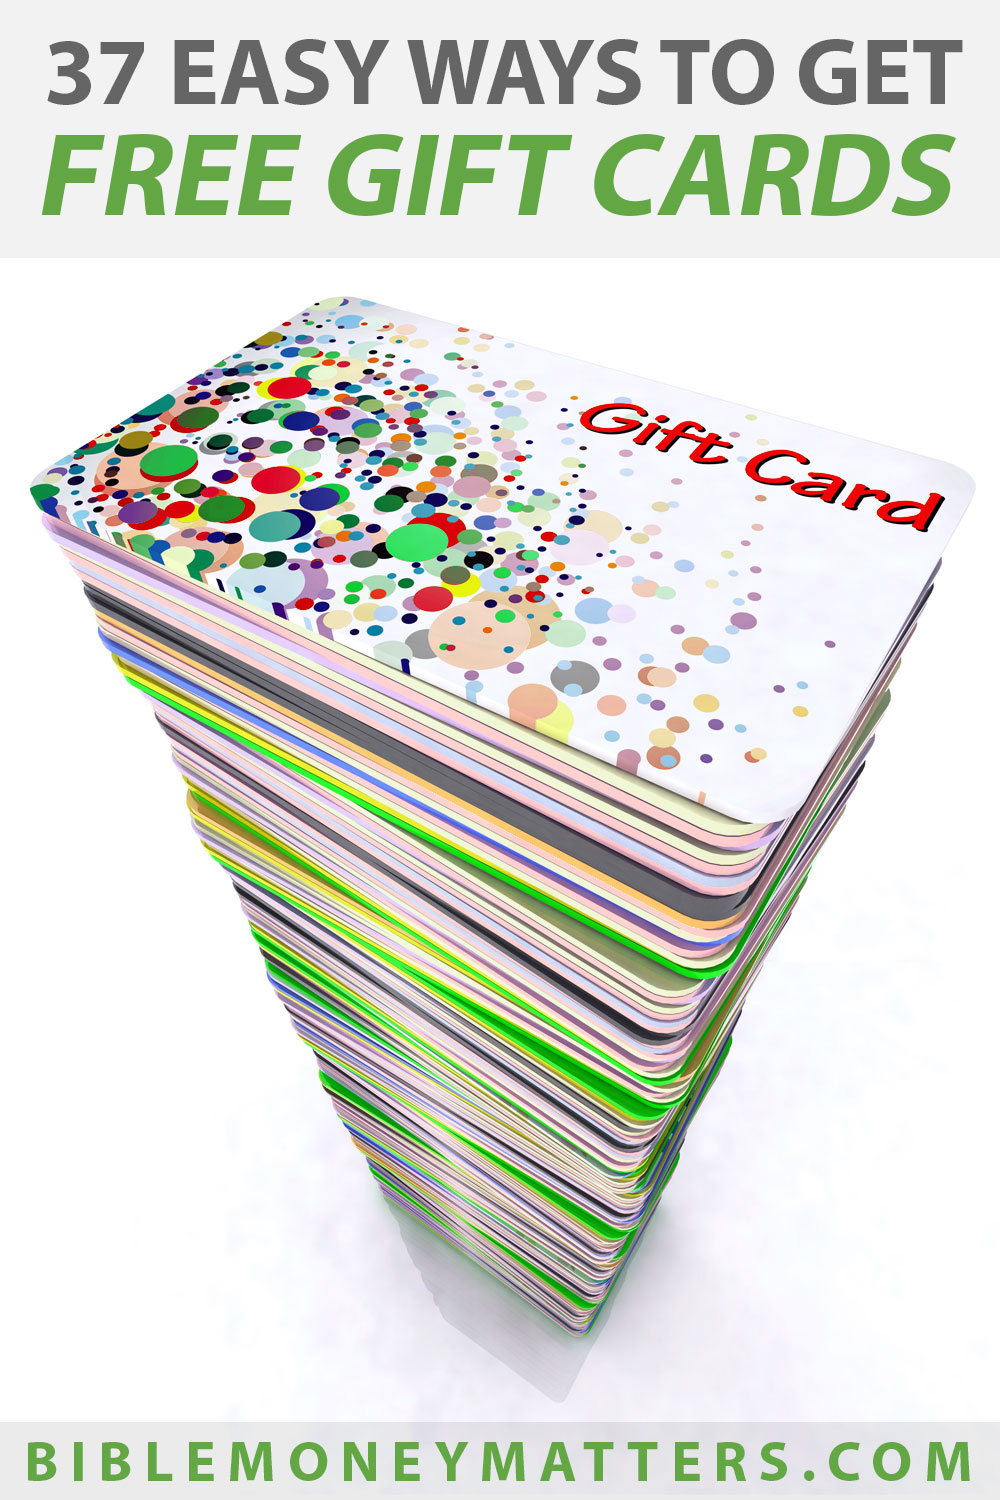 37 Easy Ways To Get Free Gift Cards (2022 Update)